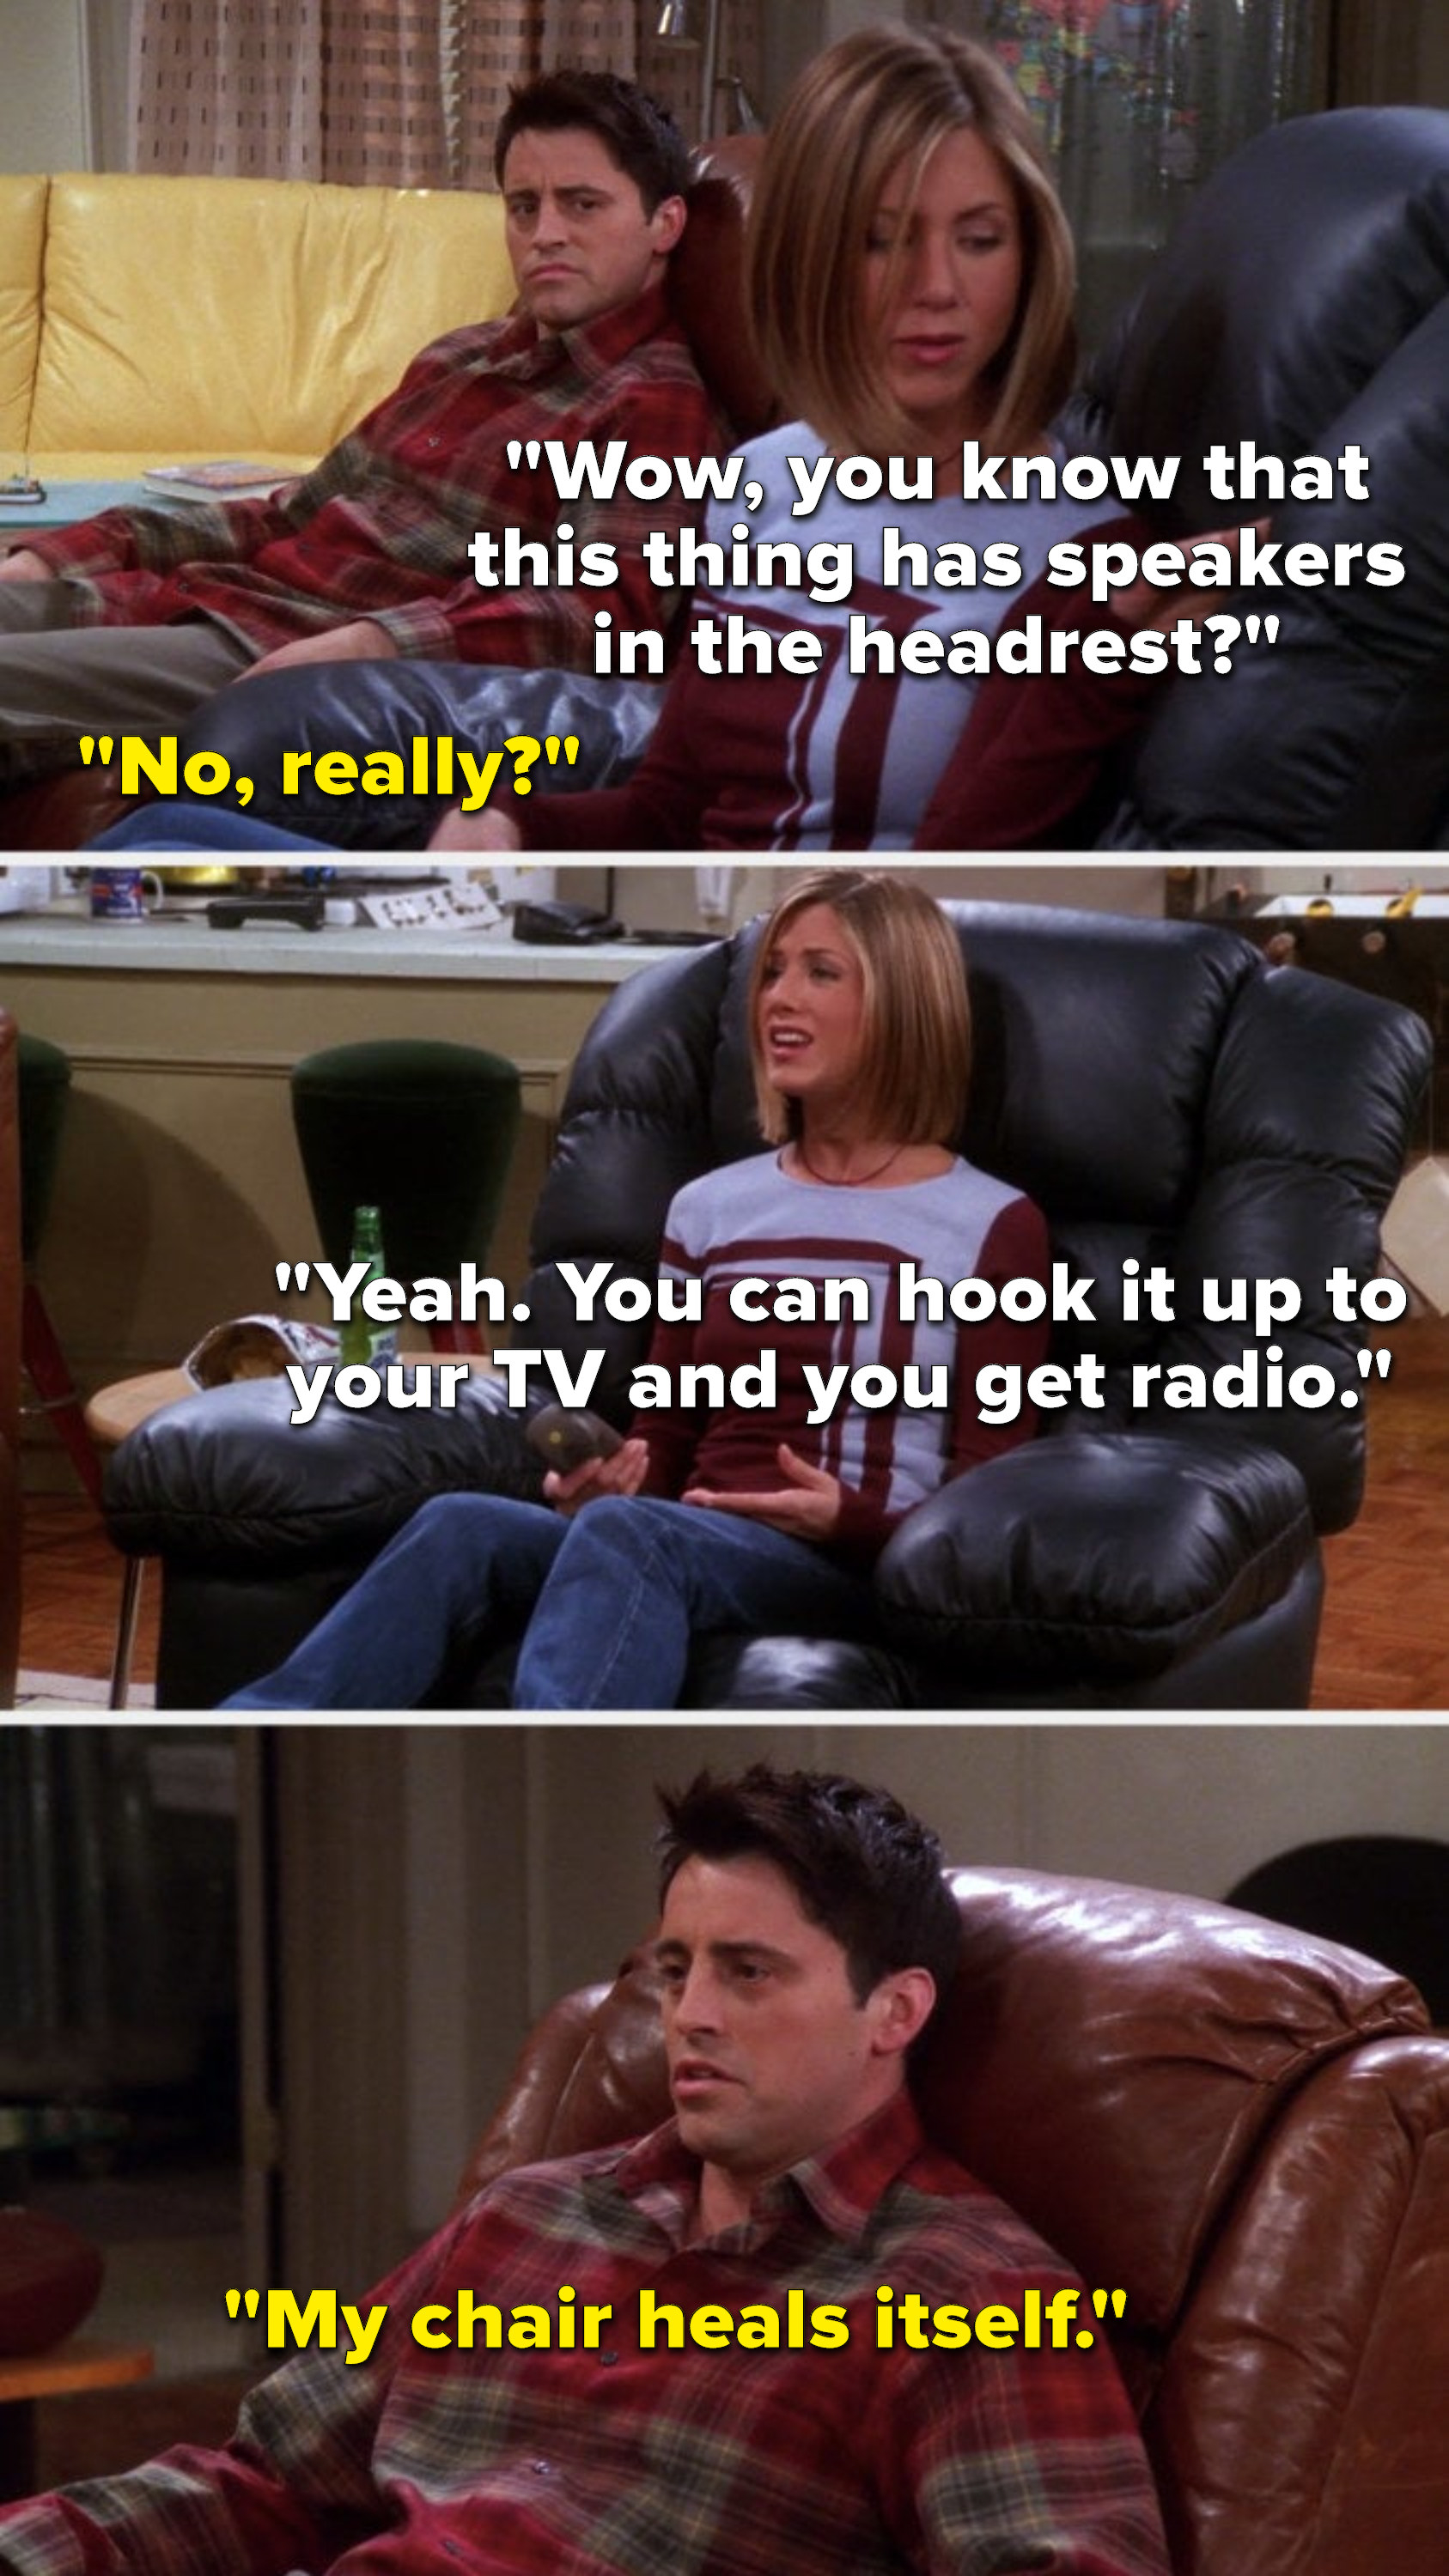 Rachel is sitting in an armchair and says, Wow, you know that this thing has speakers in the headrest, Joey says, No really, Rachel says, Yeah, You can hook it up to your TV and you get radio, and Joey says, My chair heals itself